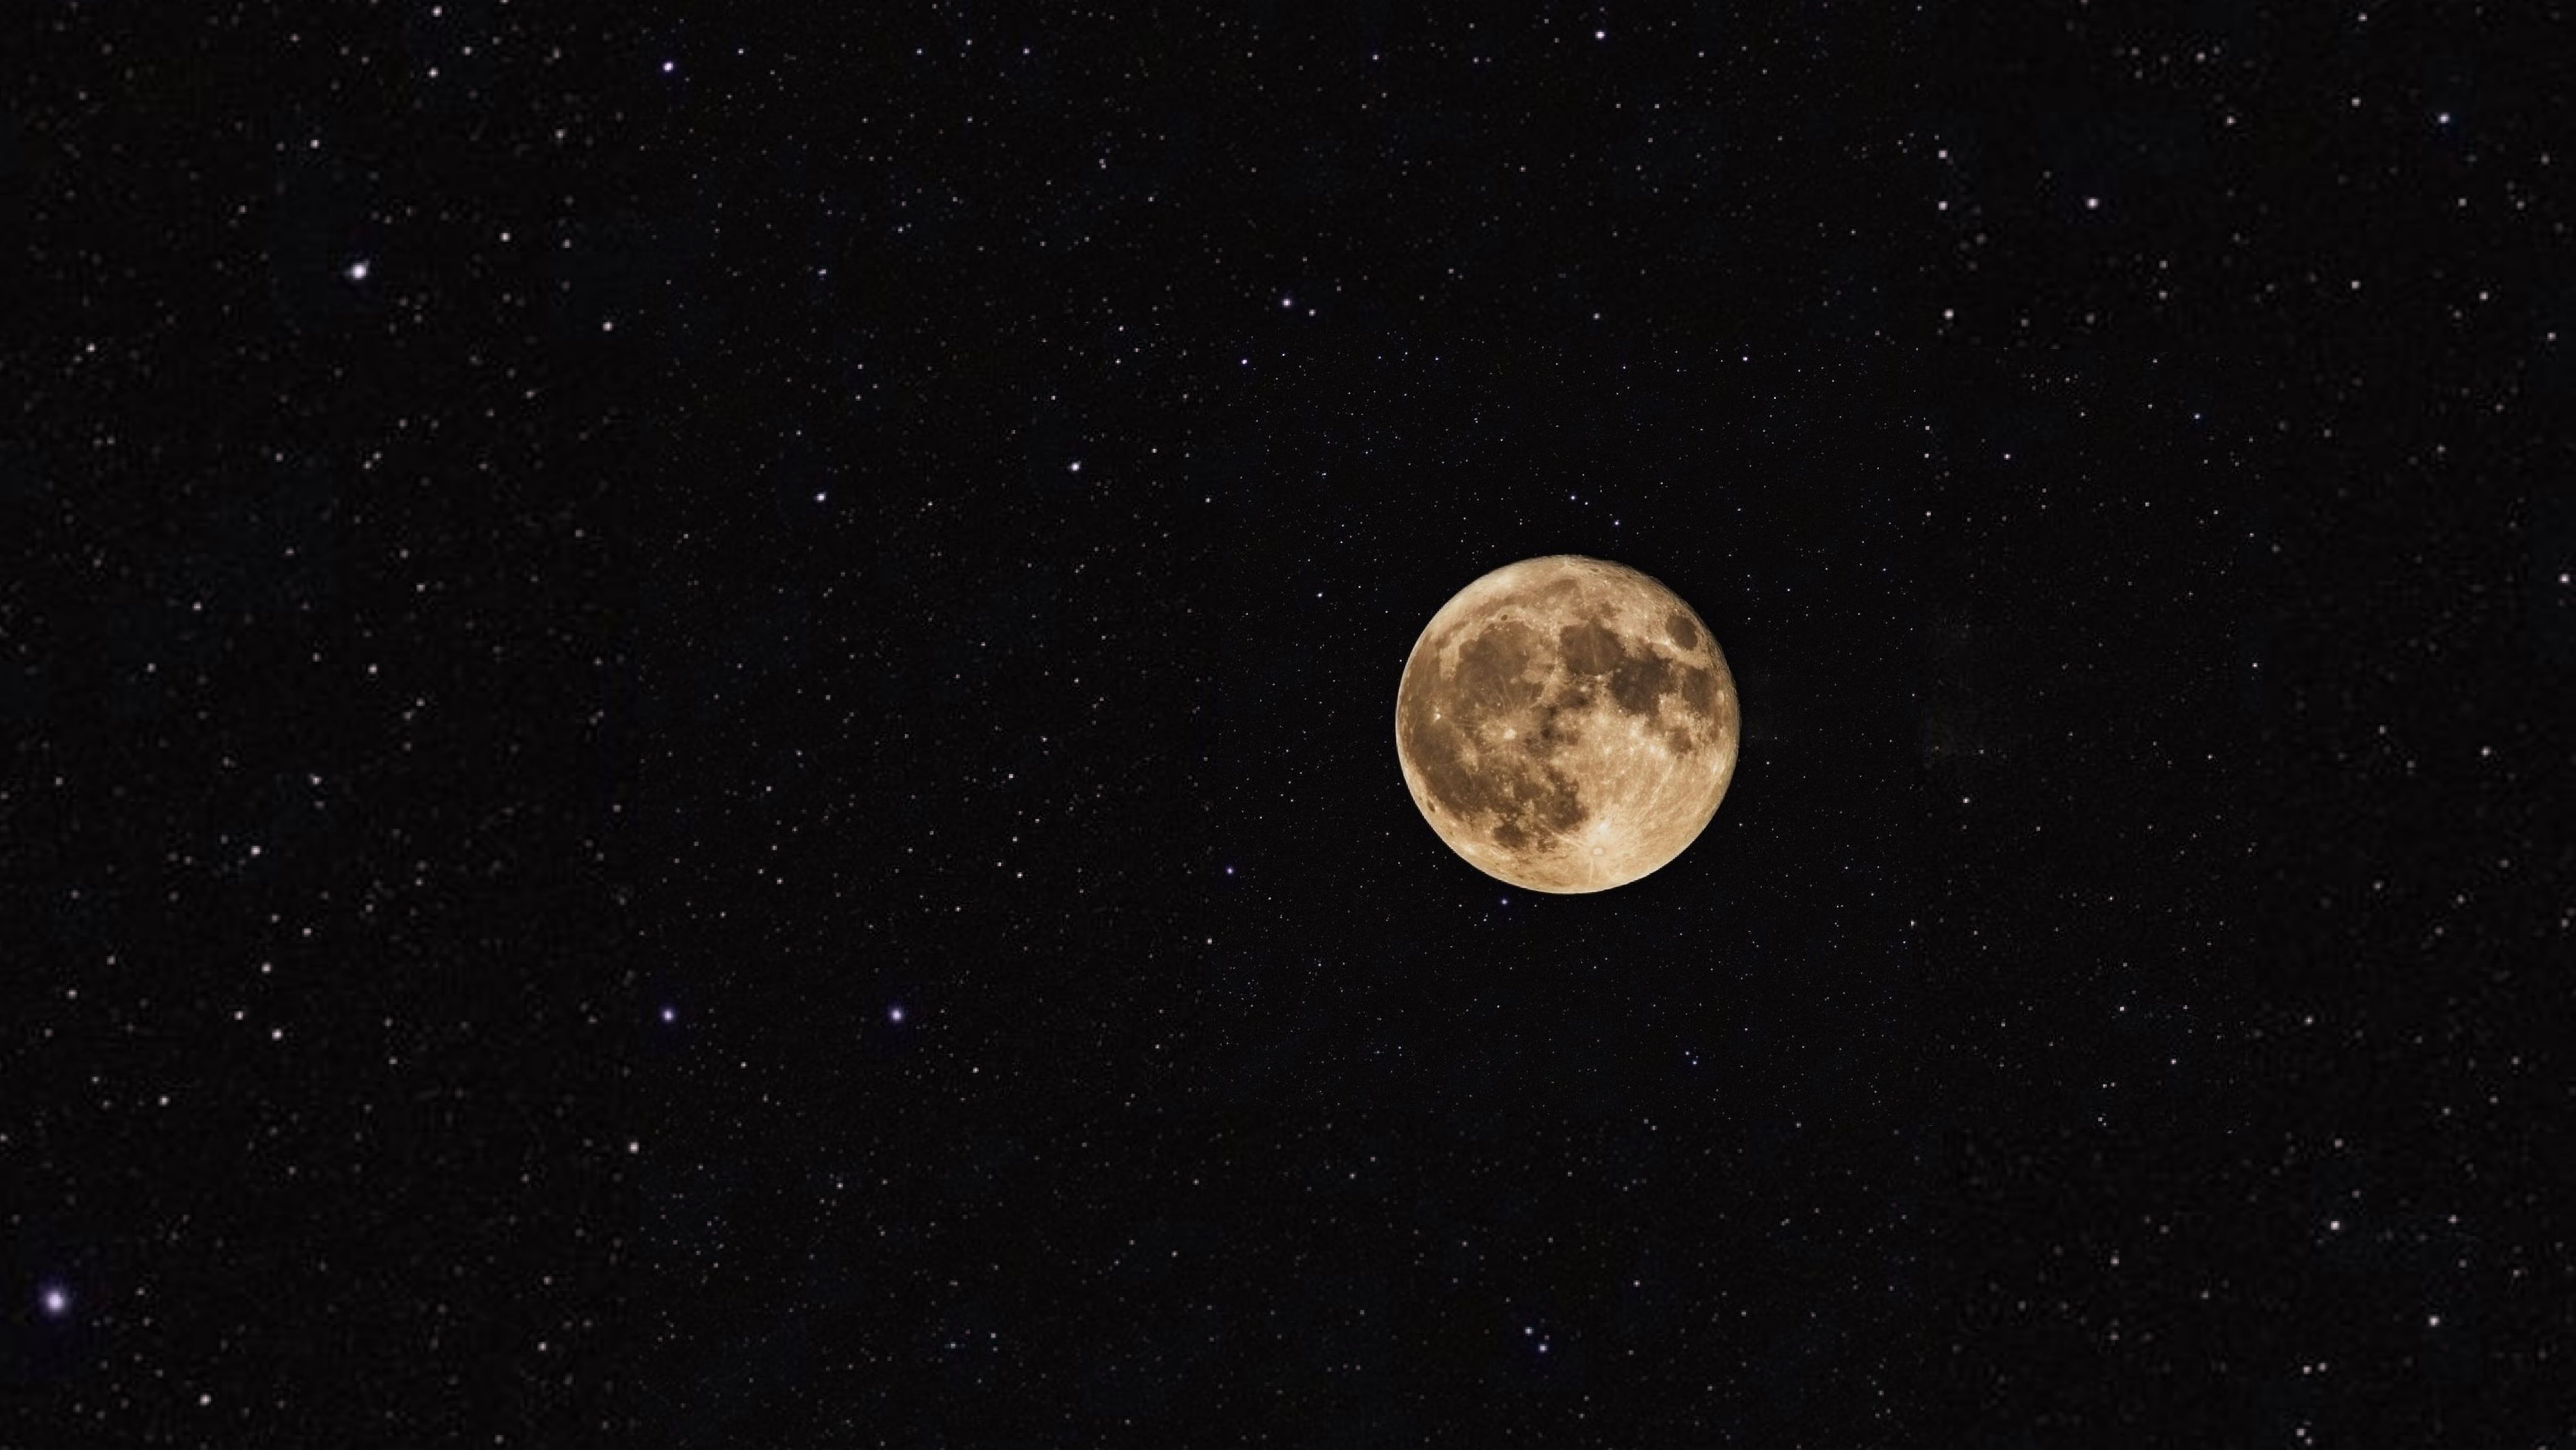 A full moon is shown in the sky - Moon